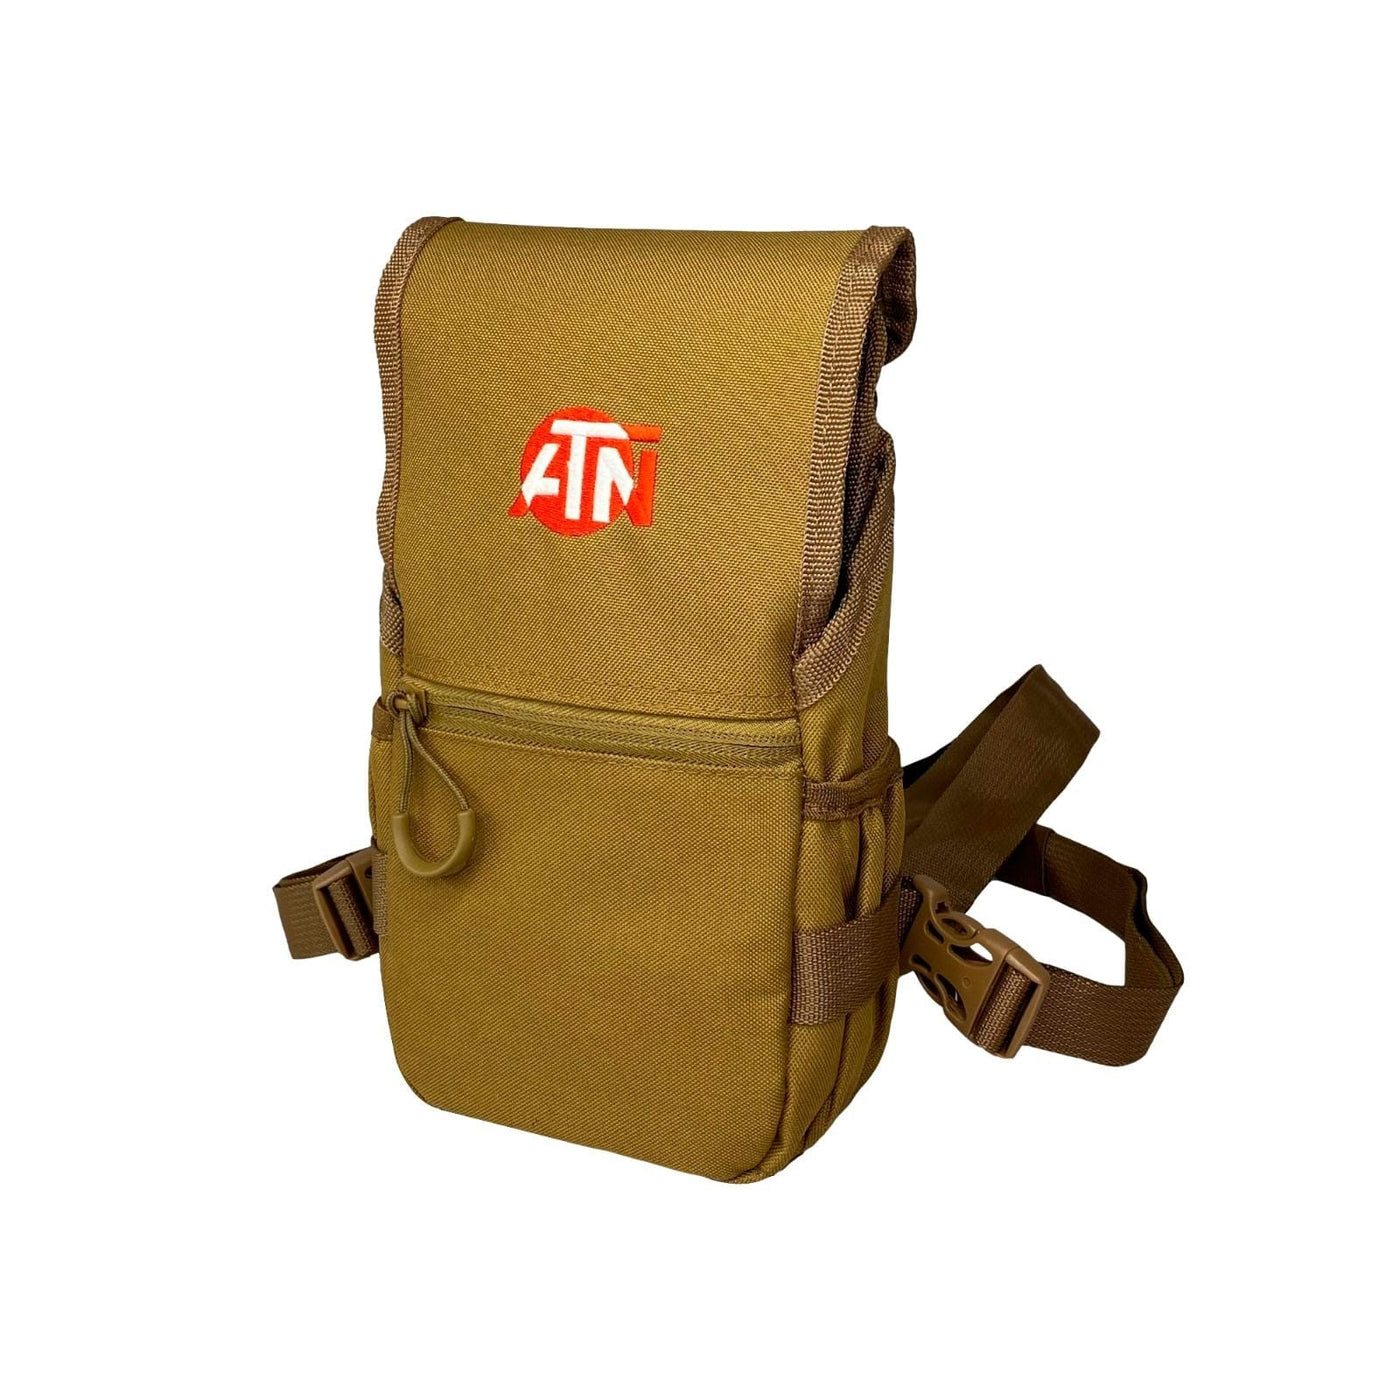 ATN ATN Deluxe Harness Chest Pack Shooting